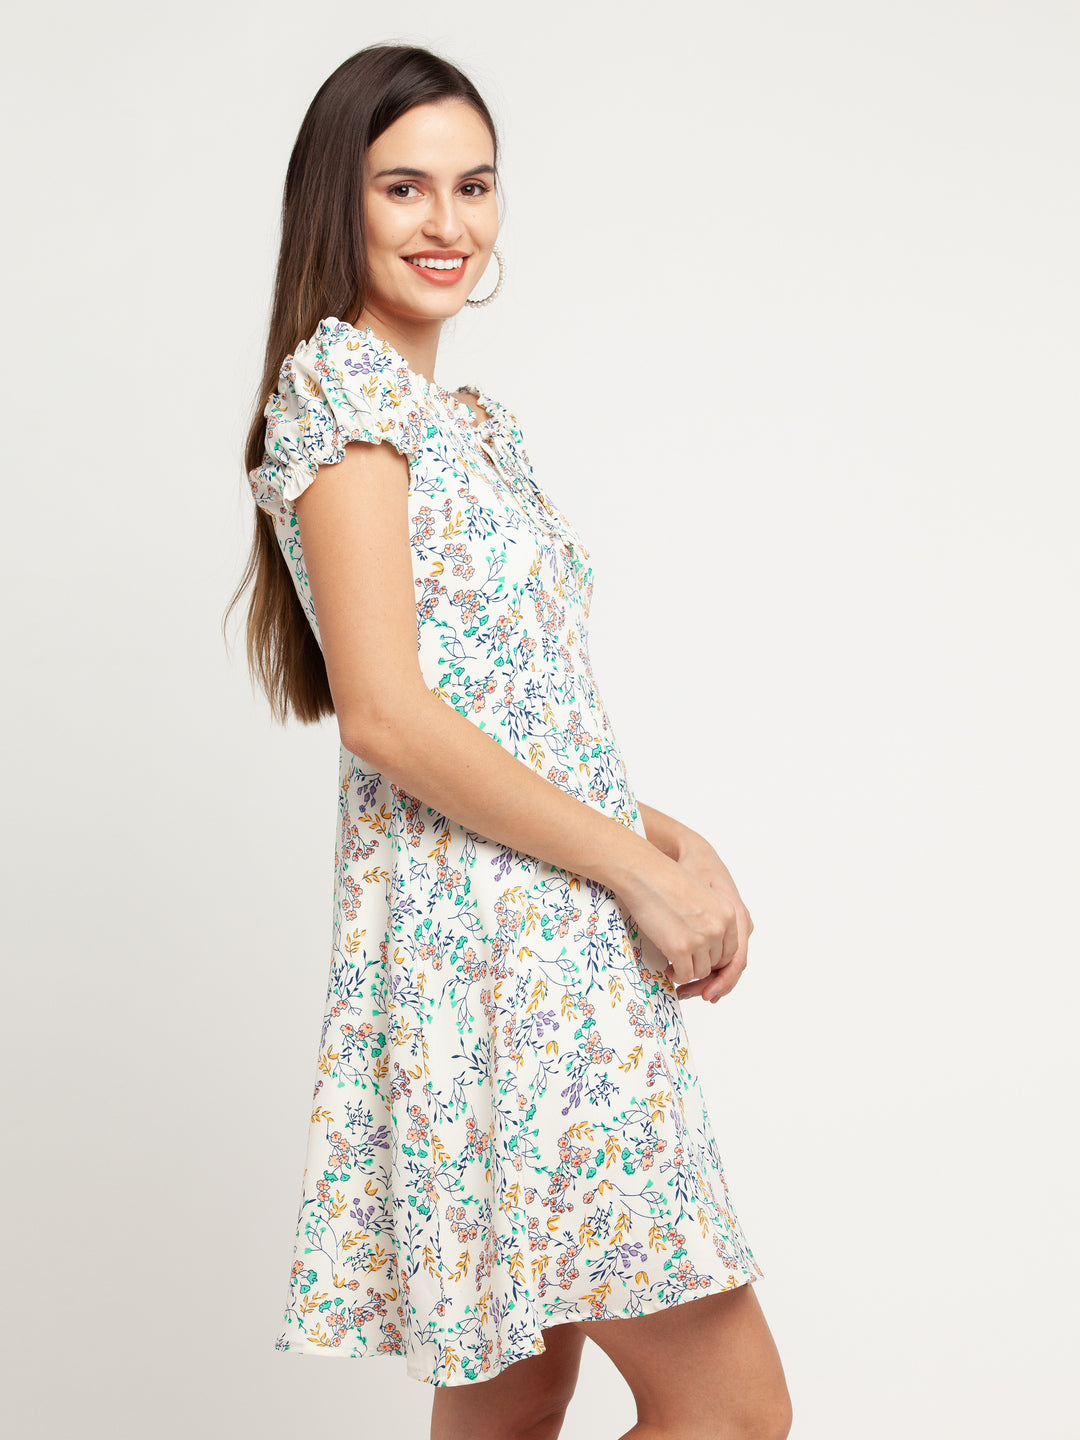 White Printed Tie-Up Short Dress For Women